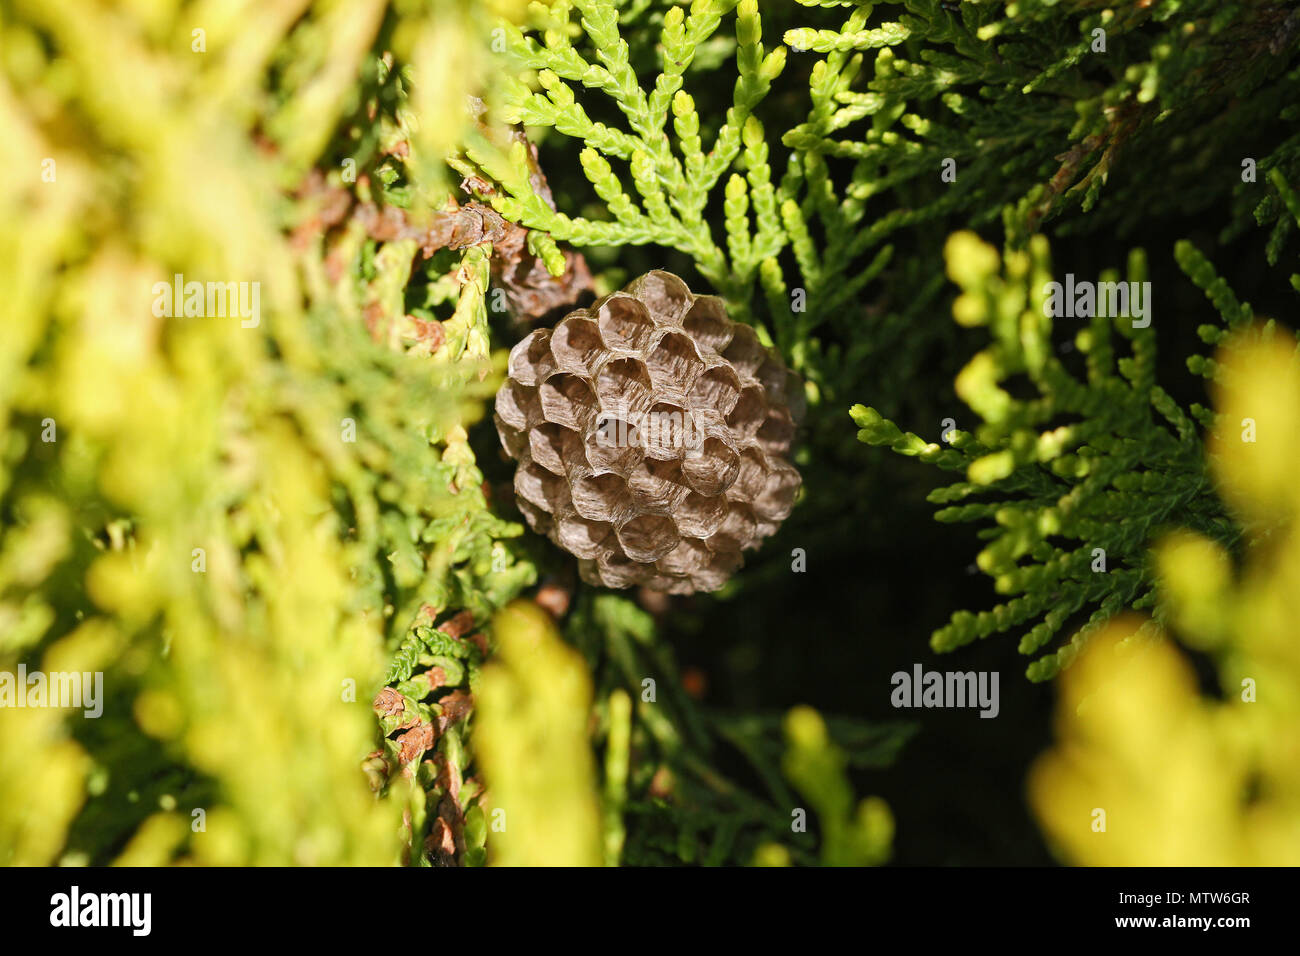 Tree wasp or paper wasp's nest close up in Italy Latin polistes gallicus or dolichovespula sylvestris in a thuja tree the umbrella nest very clear Stock Photo